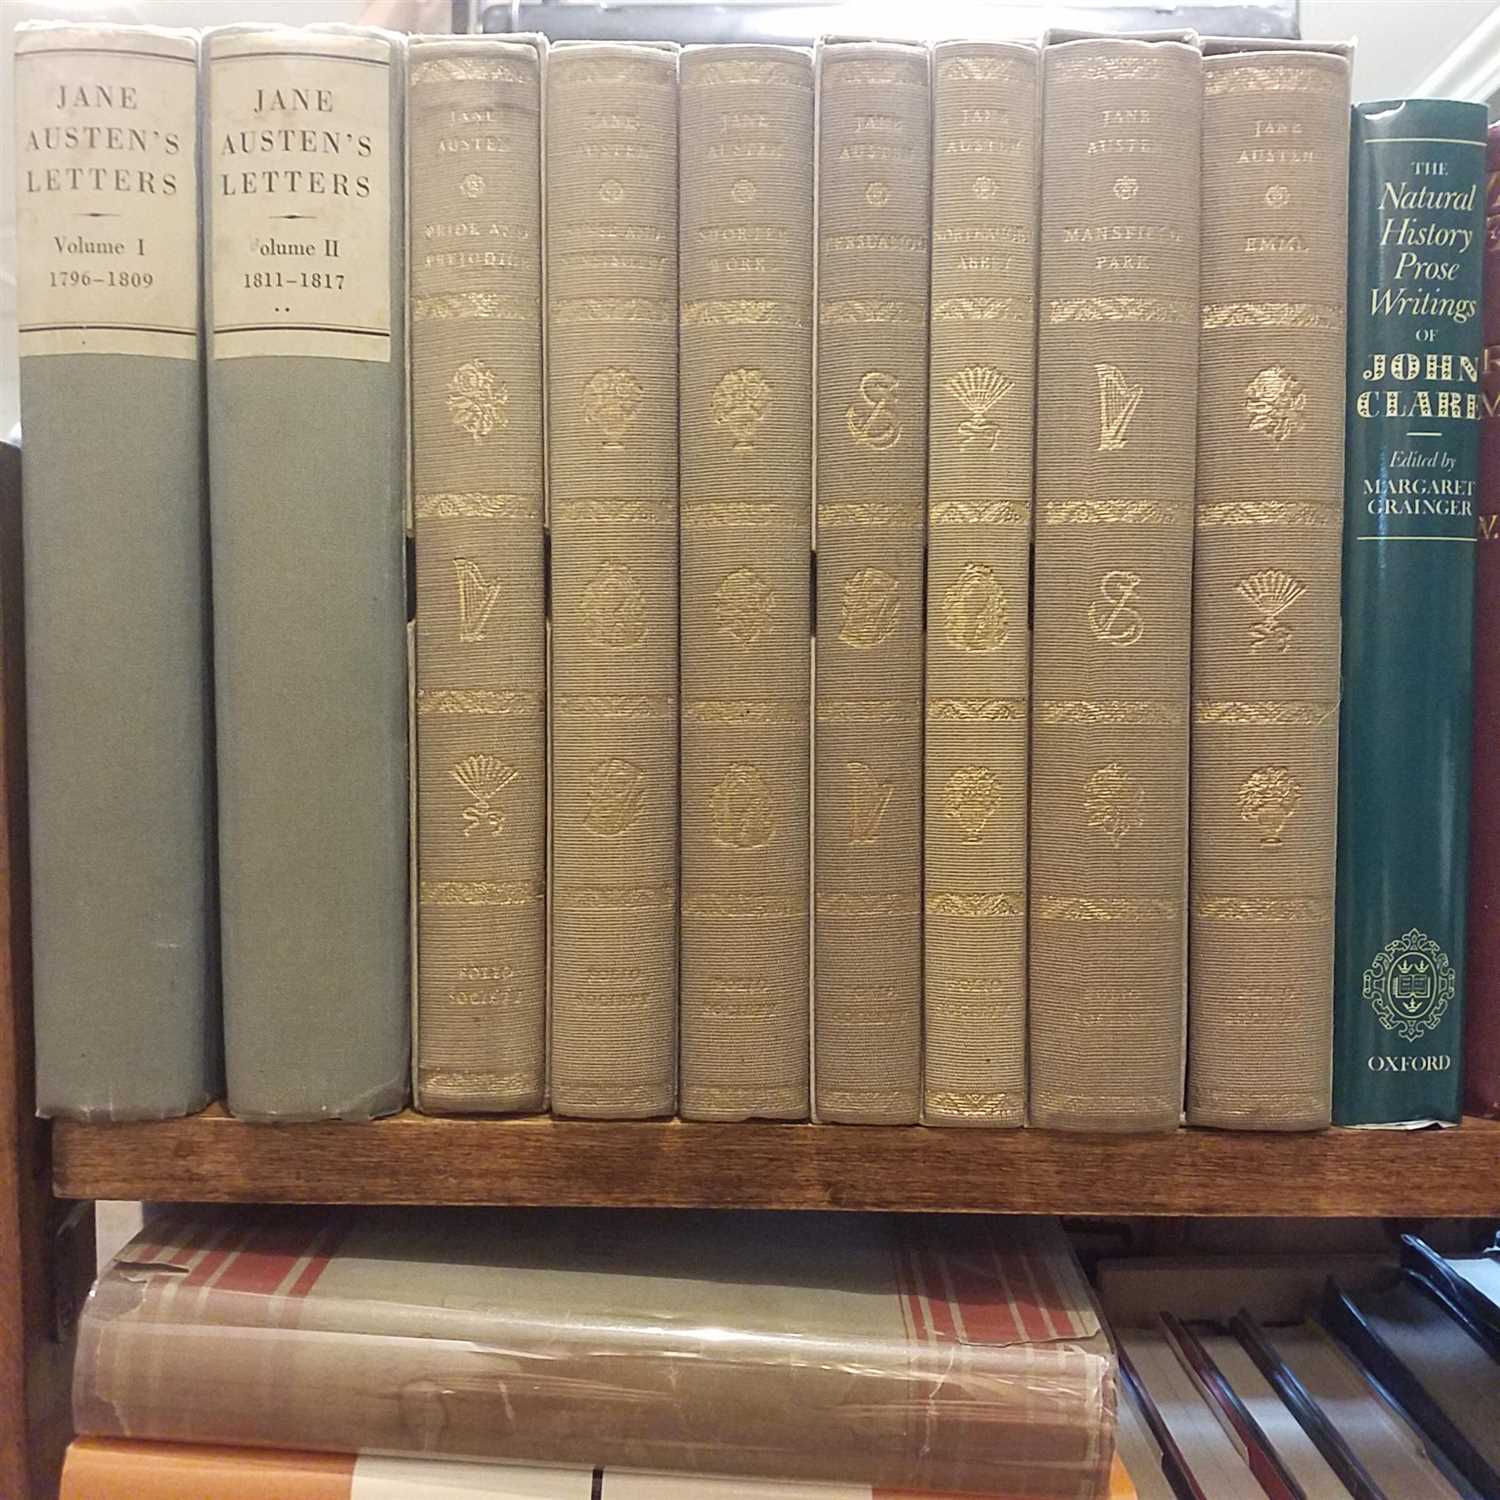 Lot 250 - Chapman (R.W.). Jane Austen's Letters to her sister Cassandra and others, 2 volumes, 1932